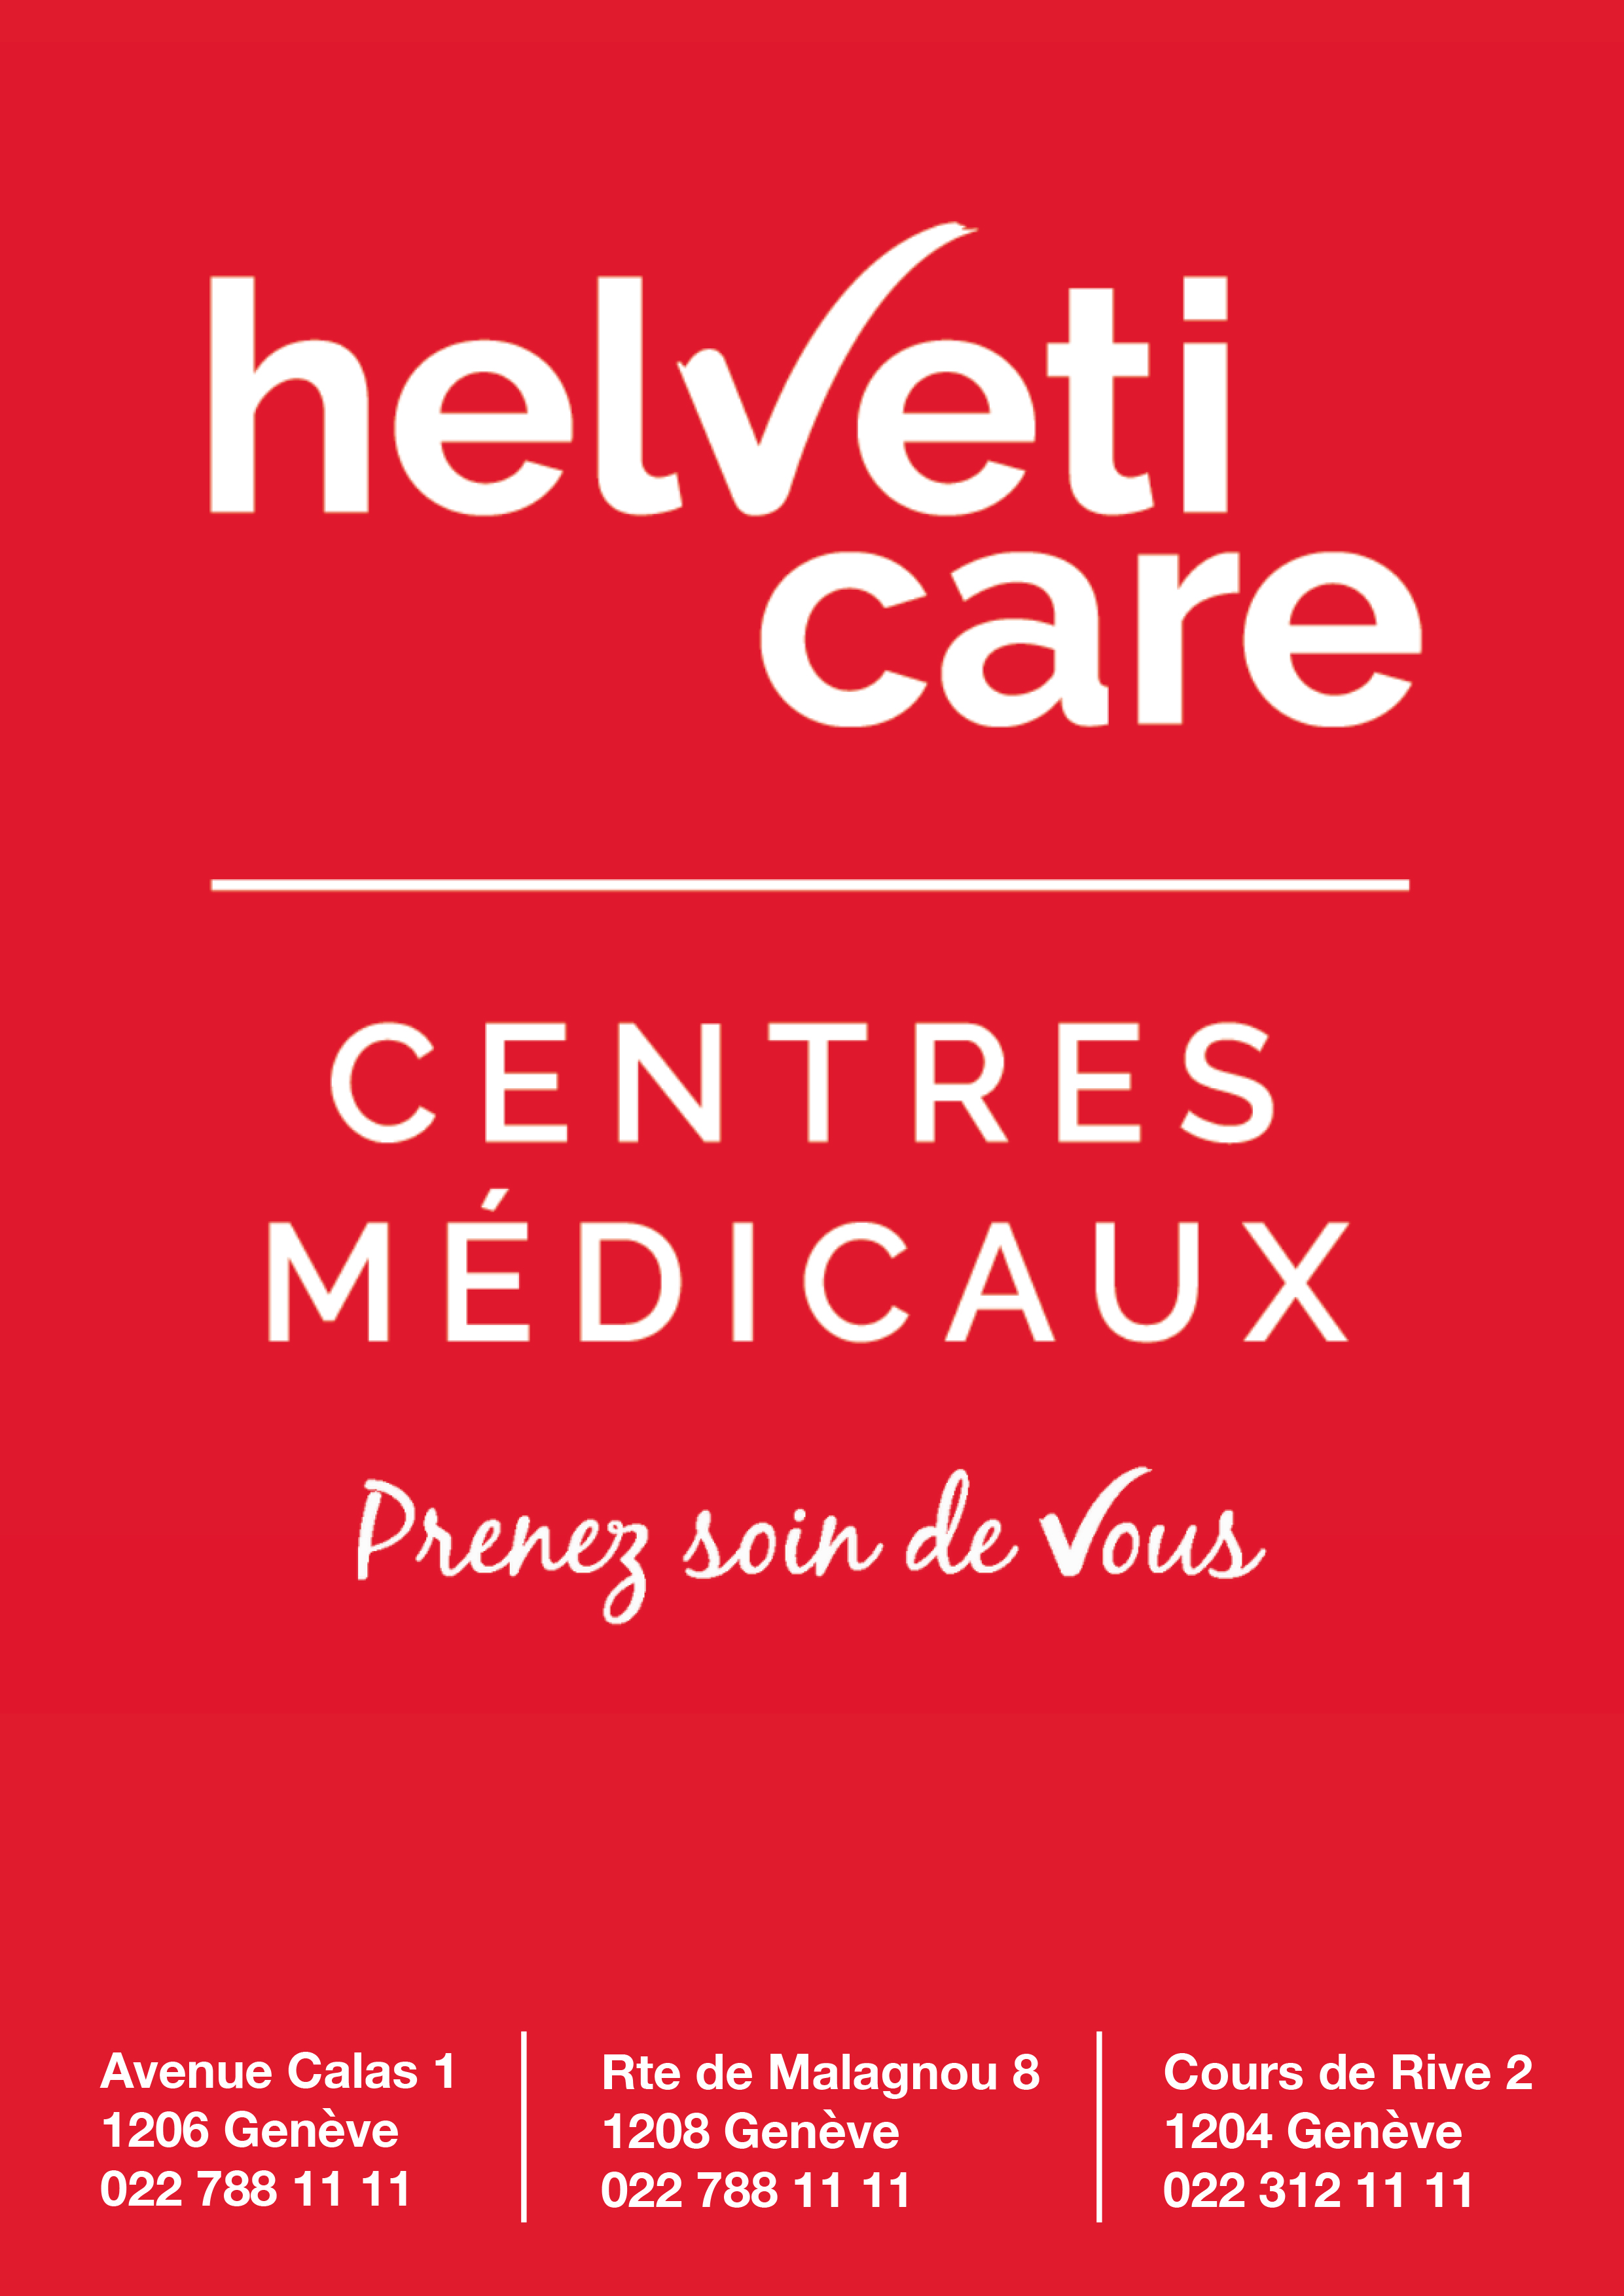 Helvetic Care